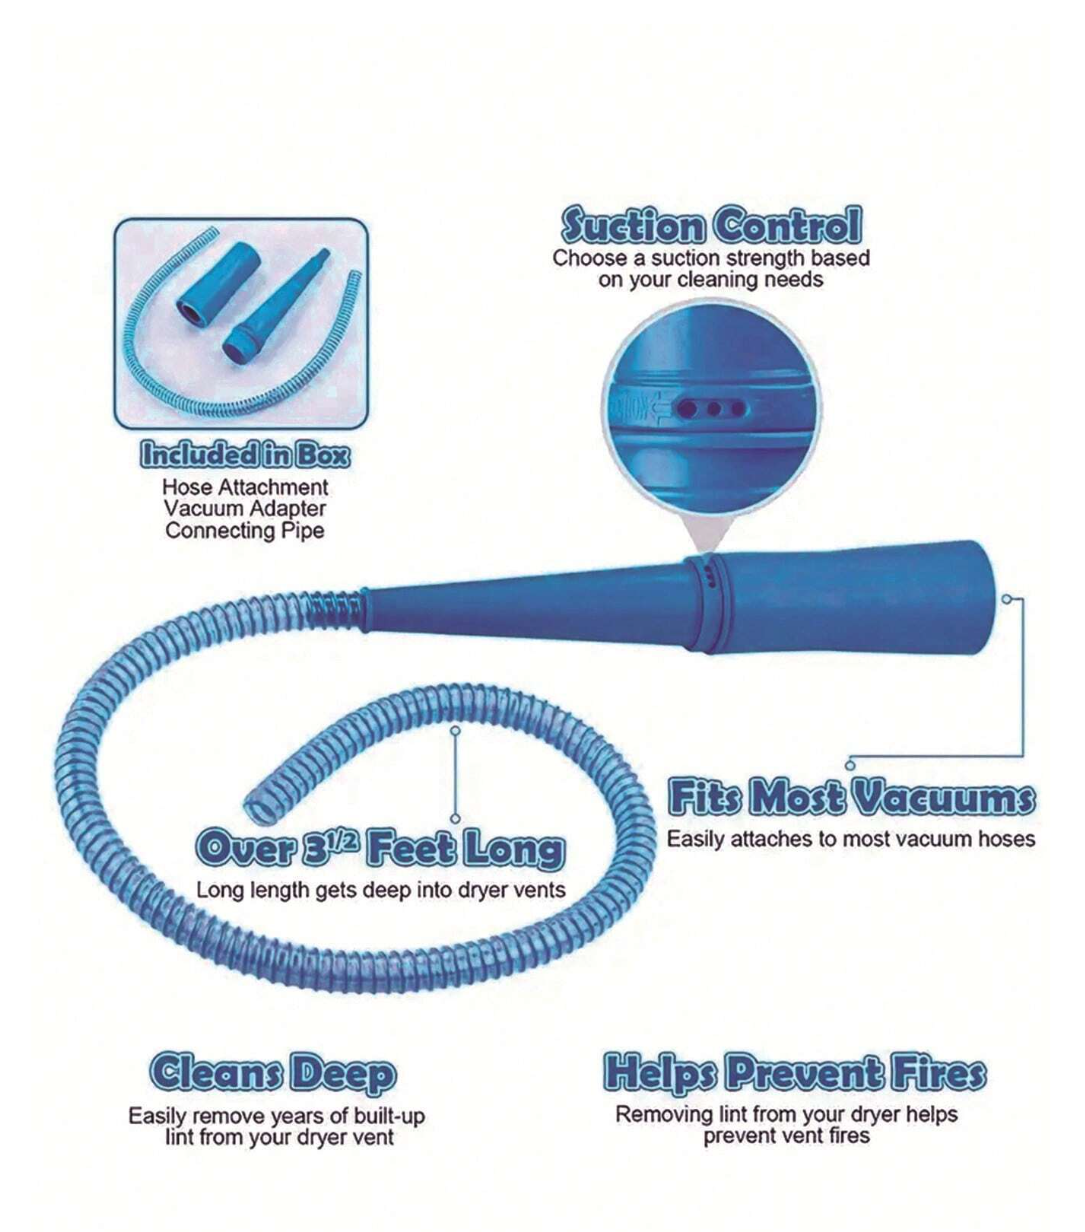 Fireproof Your Laundry Room: Deep Clean Dryer Vent Accessory for Safety & Efficiency